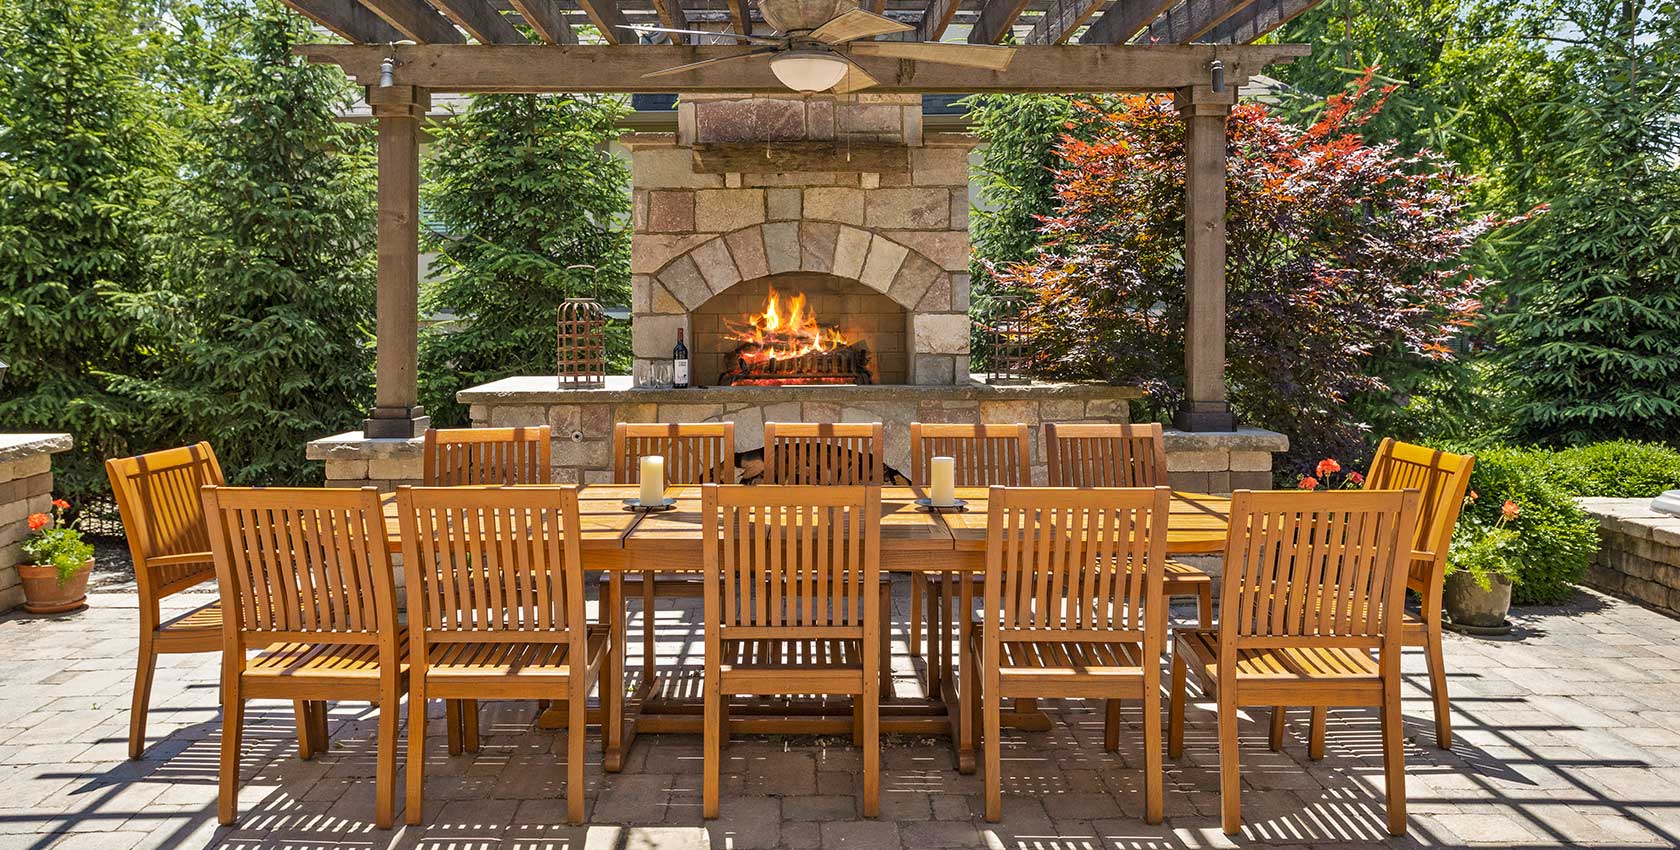 Outdoor kitchen area with fireplace.